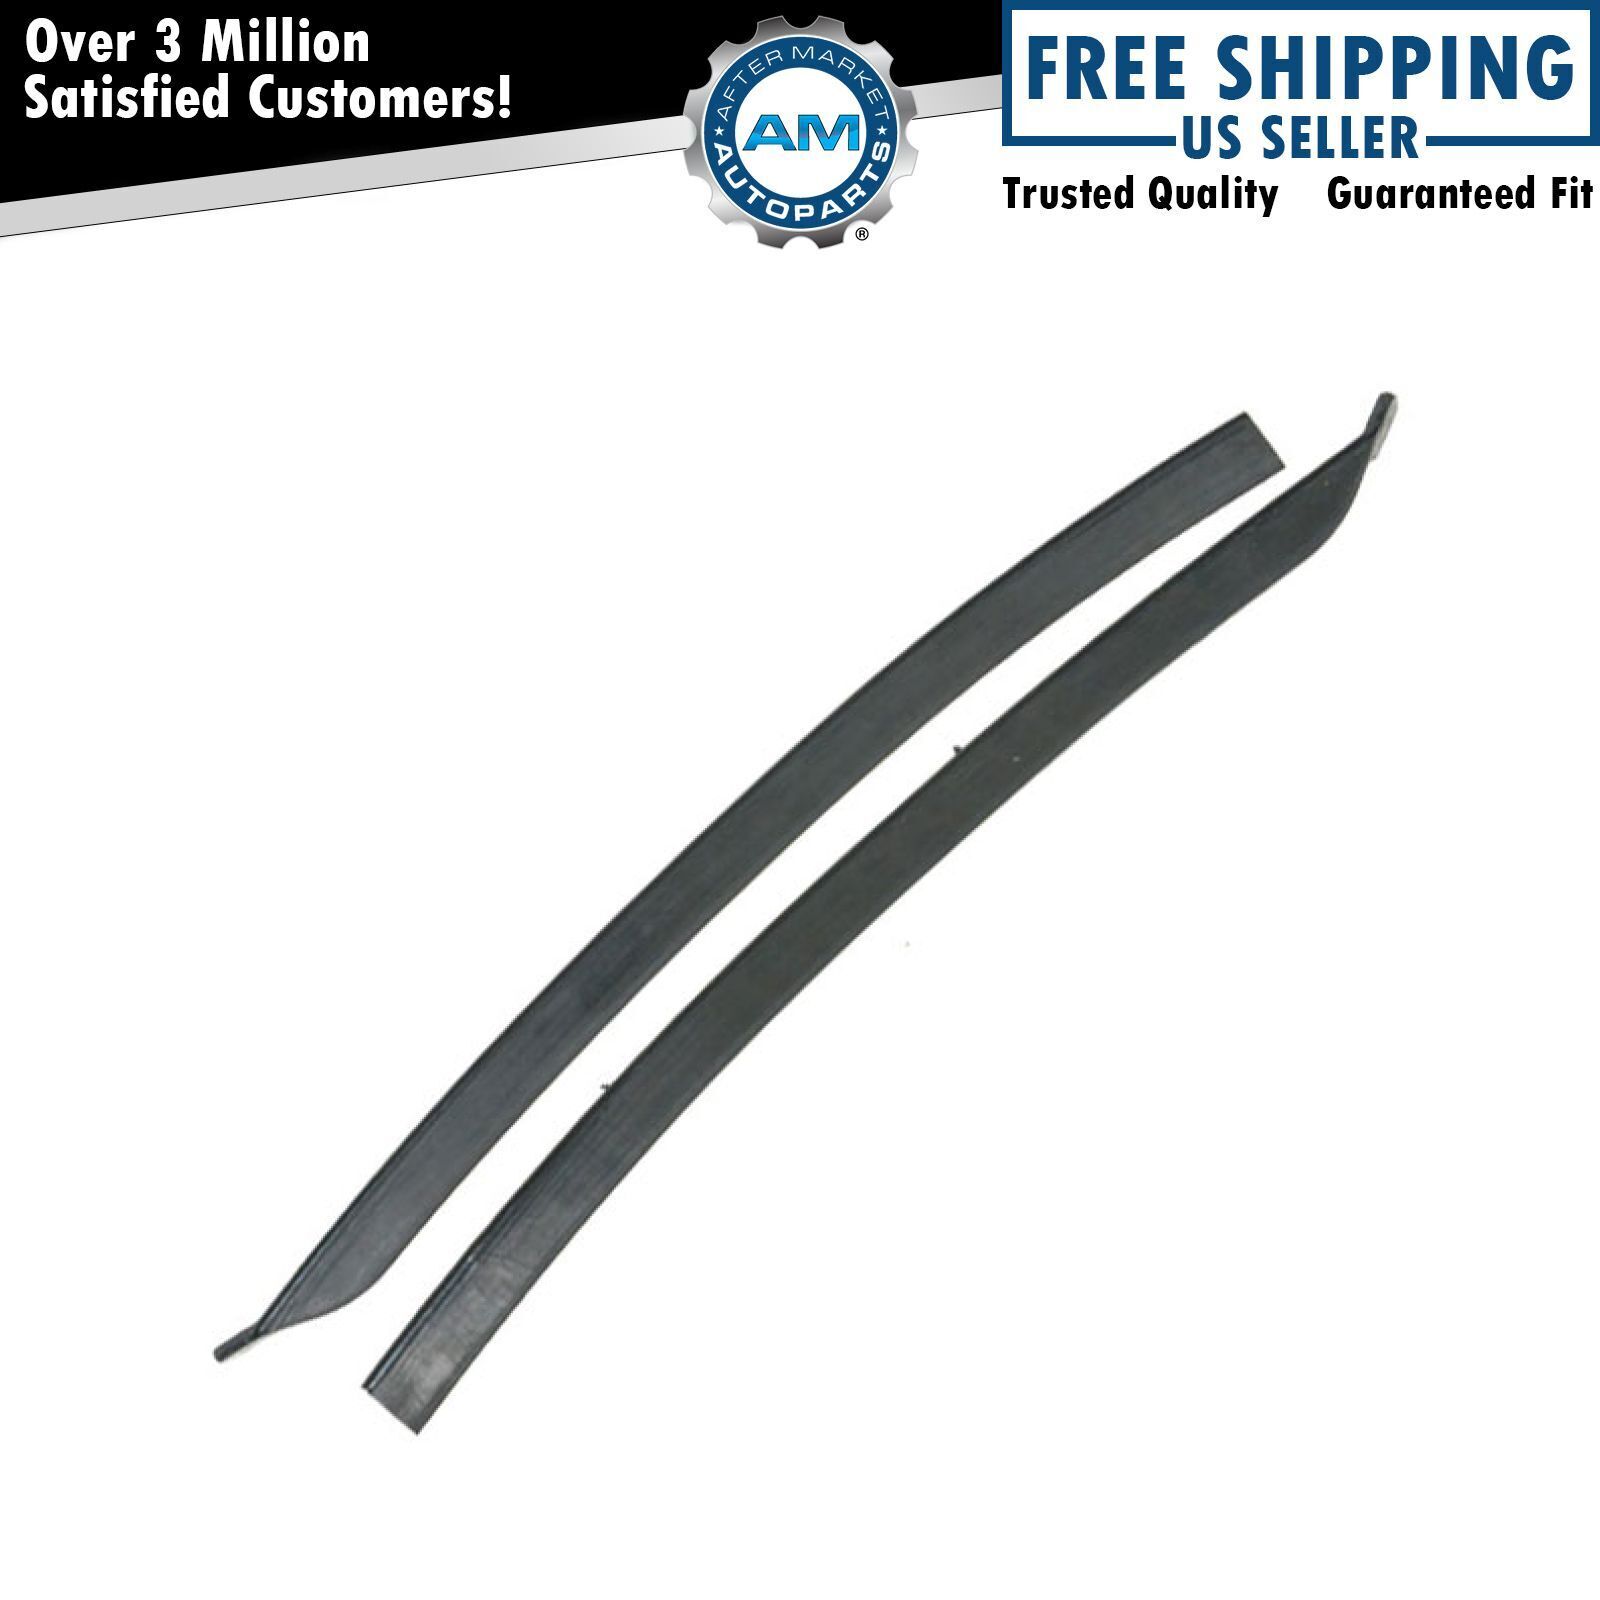 1/4 Quarter Window Weatherstrips Seals Pair Set for Buick Chevy Olds Pontiac